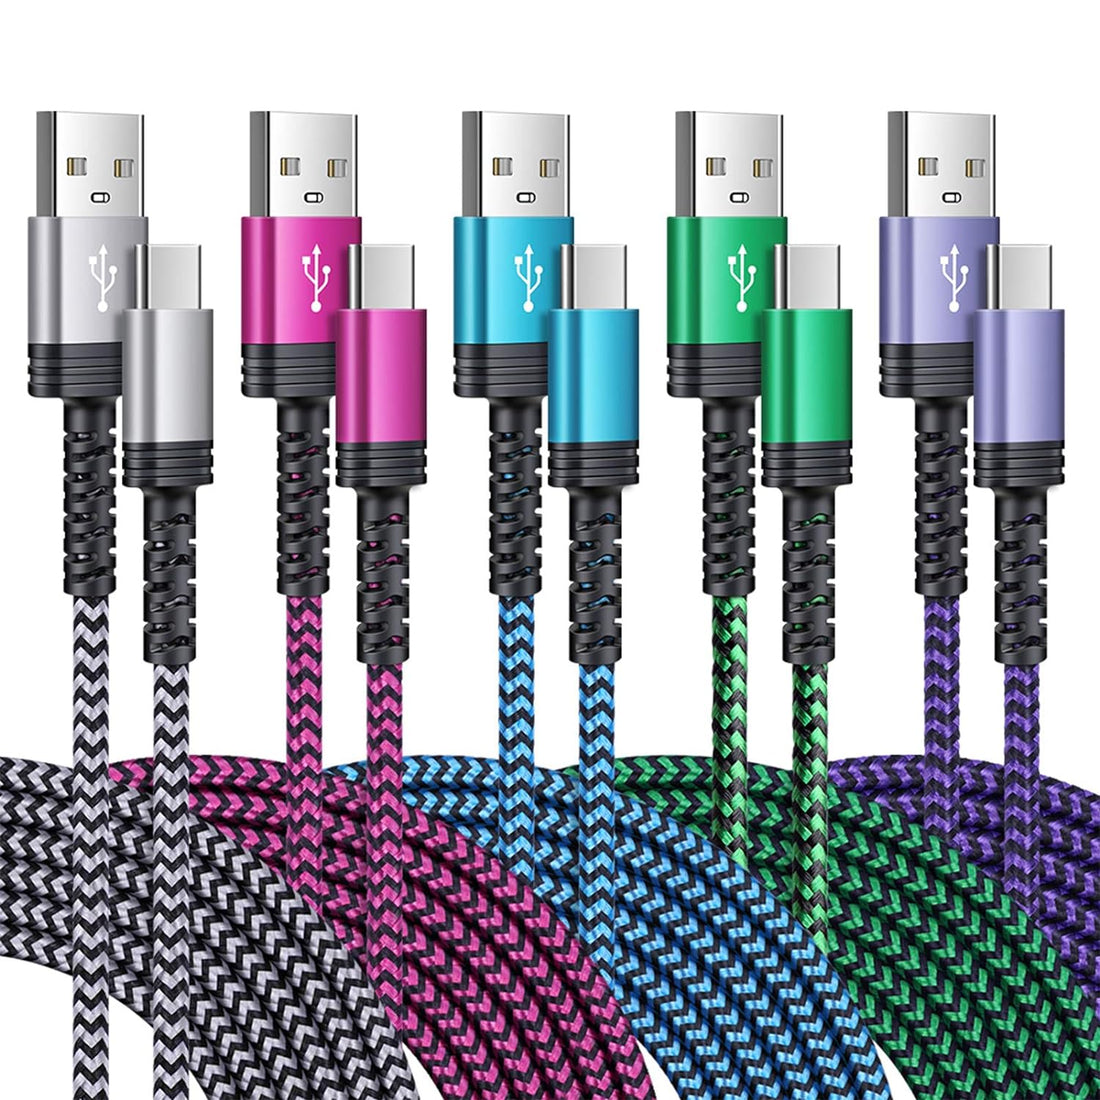 USB C Cable, SIXSIM 5Pack 6FT USB C to USB A Braided Fast Charging Phone Charger Cord Type C Cable Compatible Samsung Galaxy S20 S10 S9 S8 A80 A71 A50 A20e Note 10 9 8, LG V60 V50 ThinQ, Moto G8 G7 G6